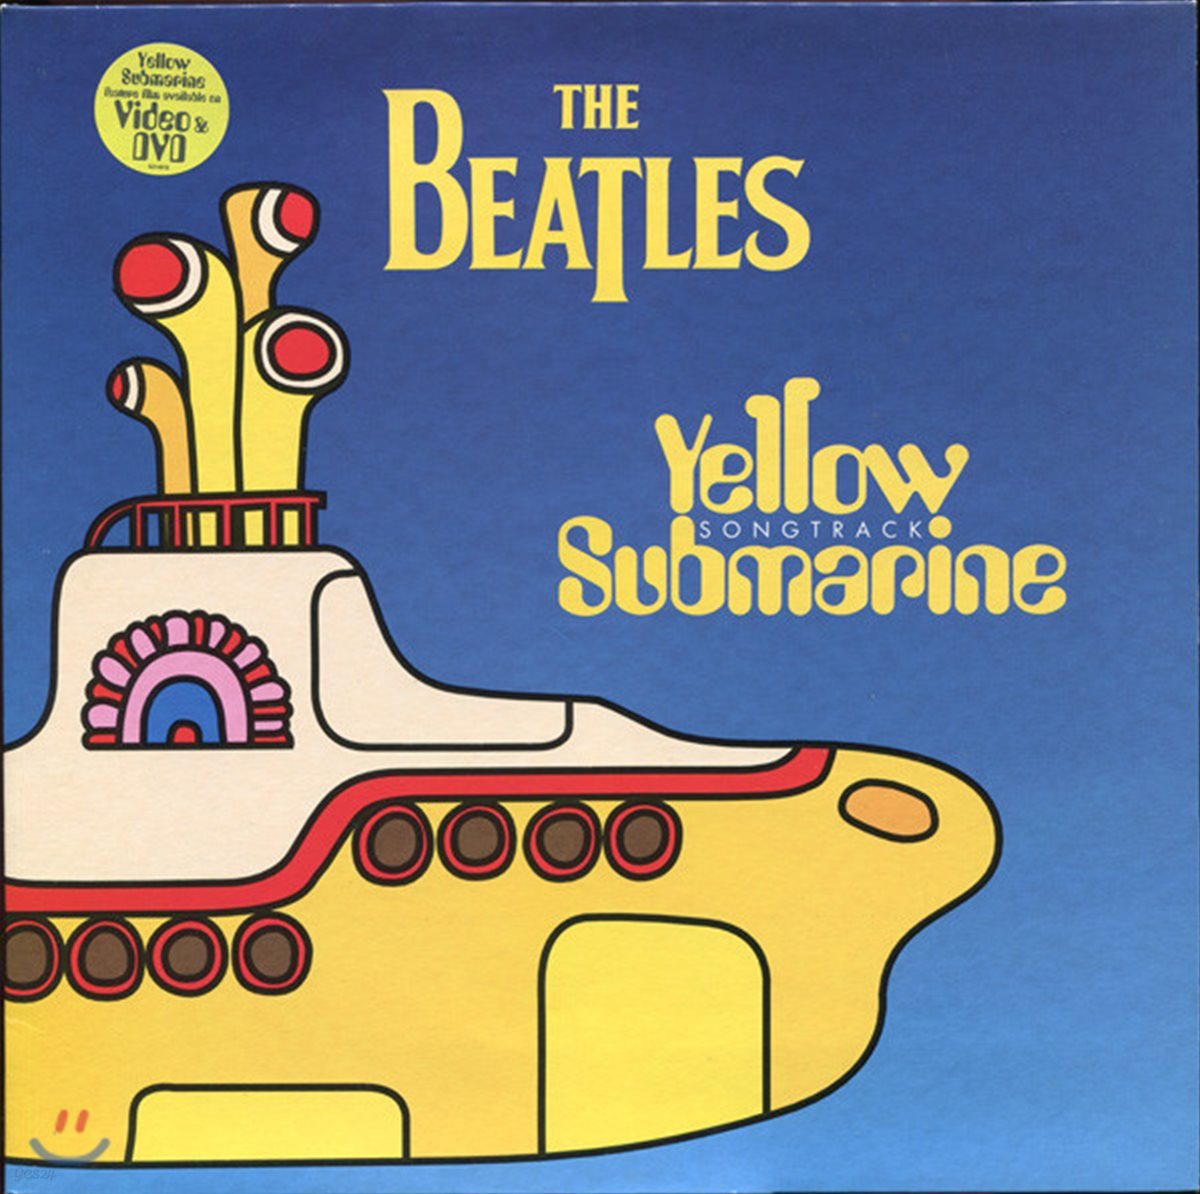 The Beatles - 노란 잠수함 영화음악 (Yellow Submarine OST Songtrack) [LP]